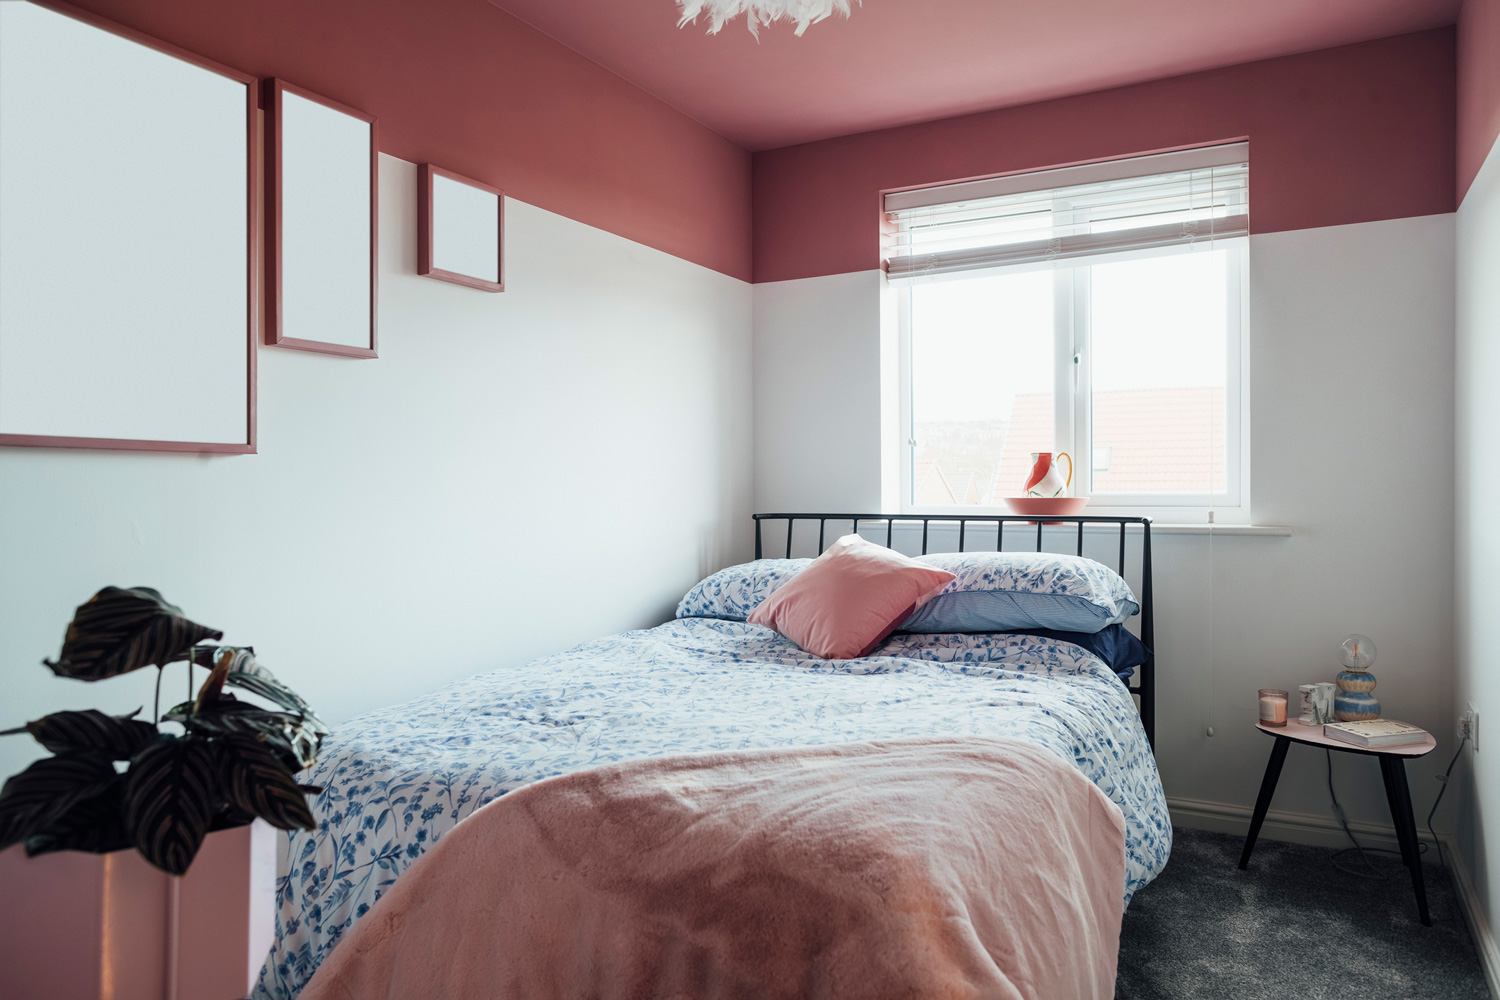 Interior of a feminine bedroom in the Northeast of England. There is a pink ceiling.